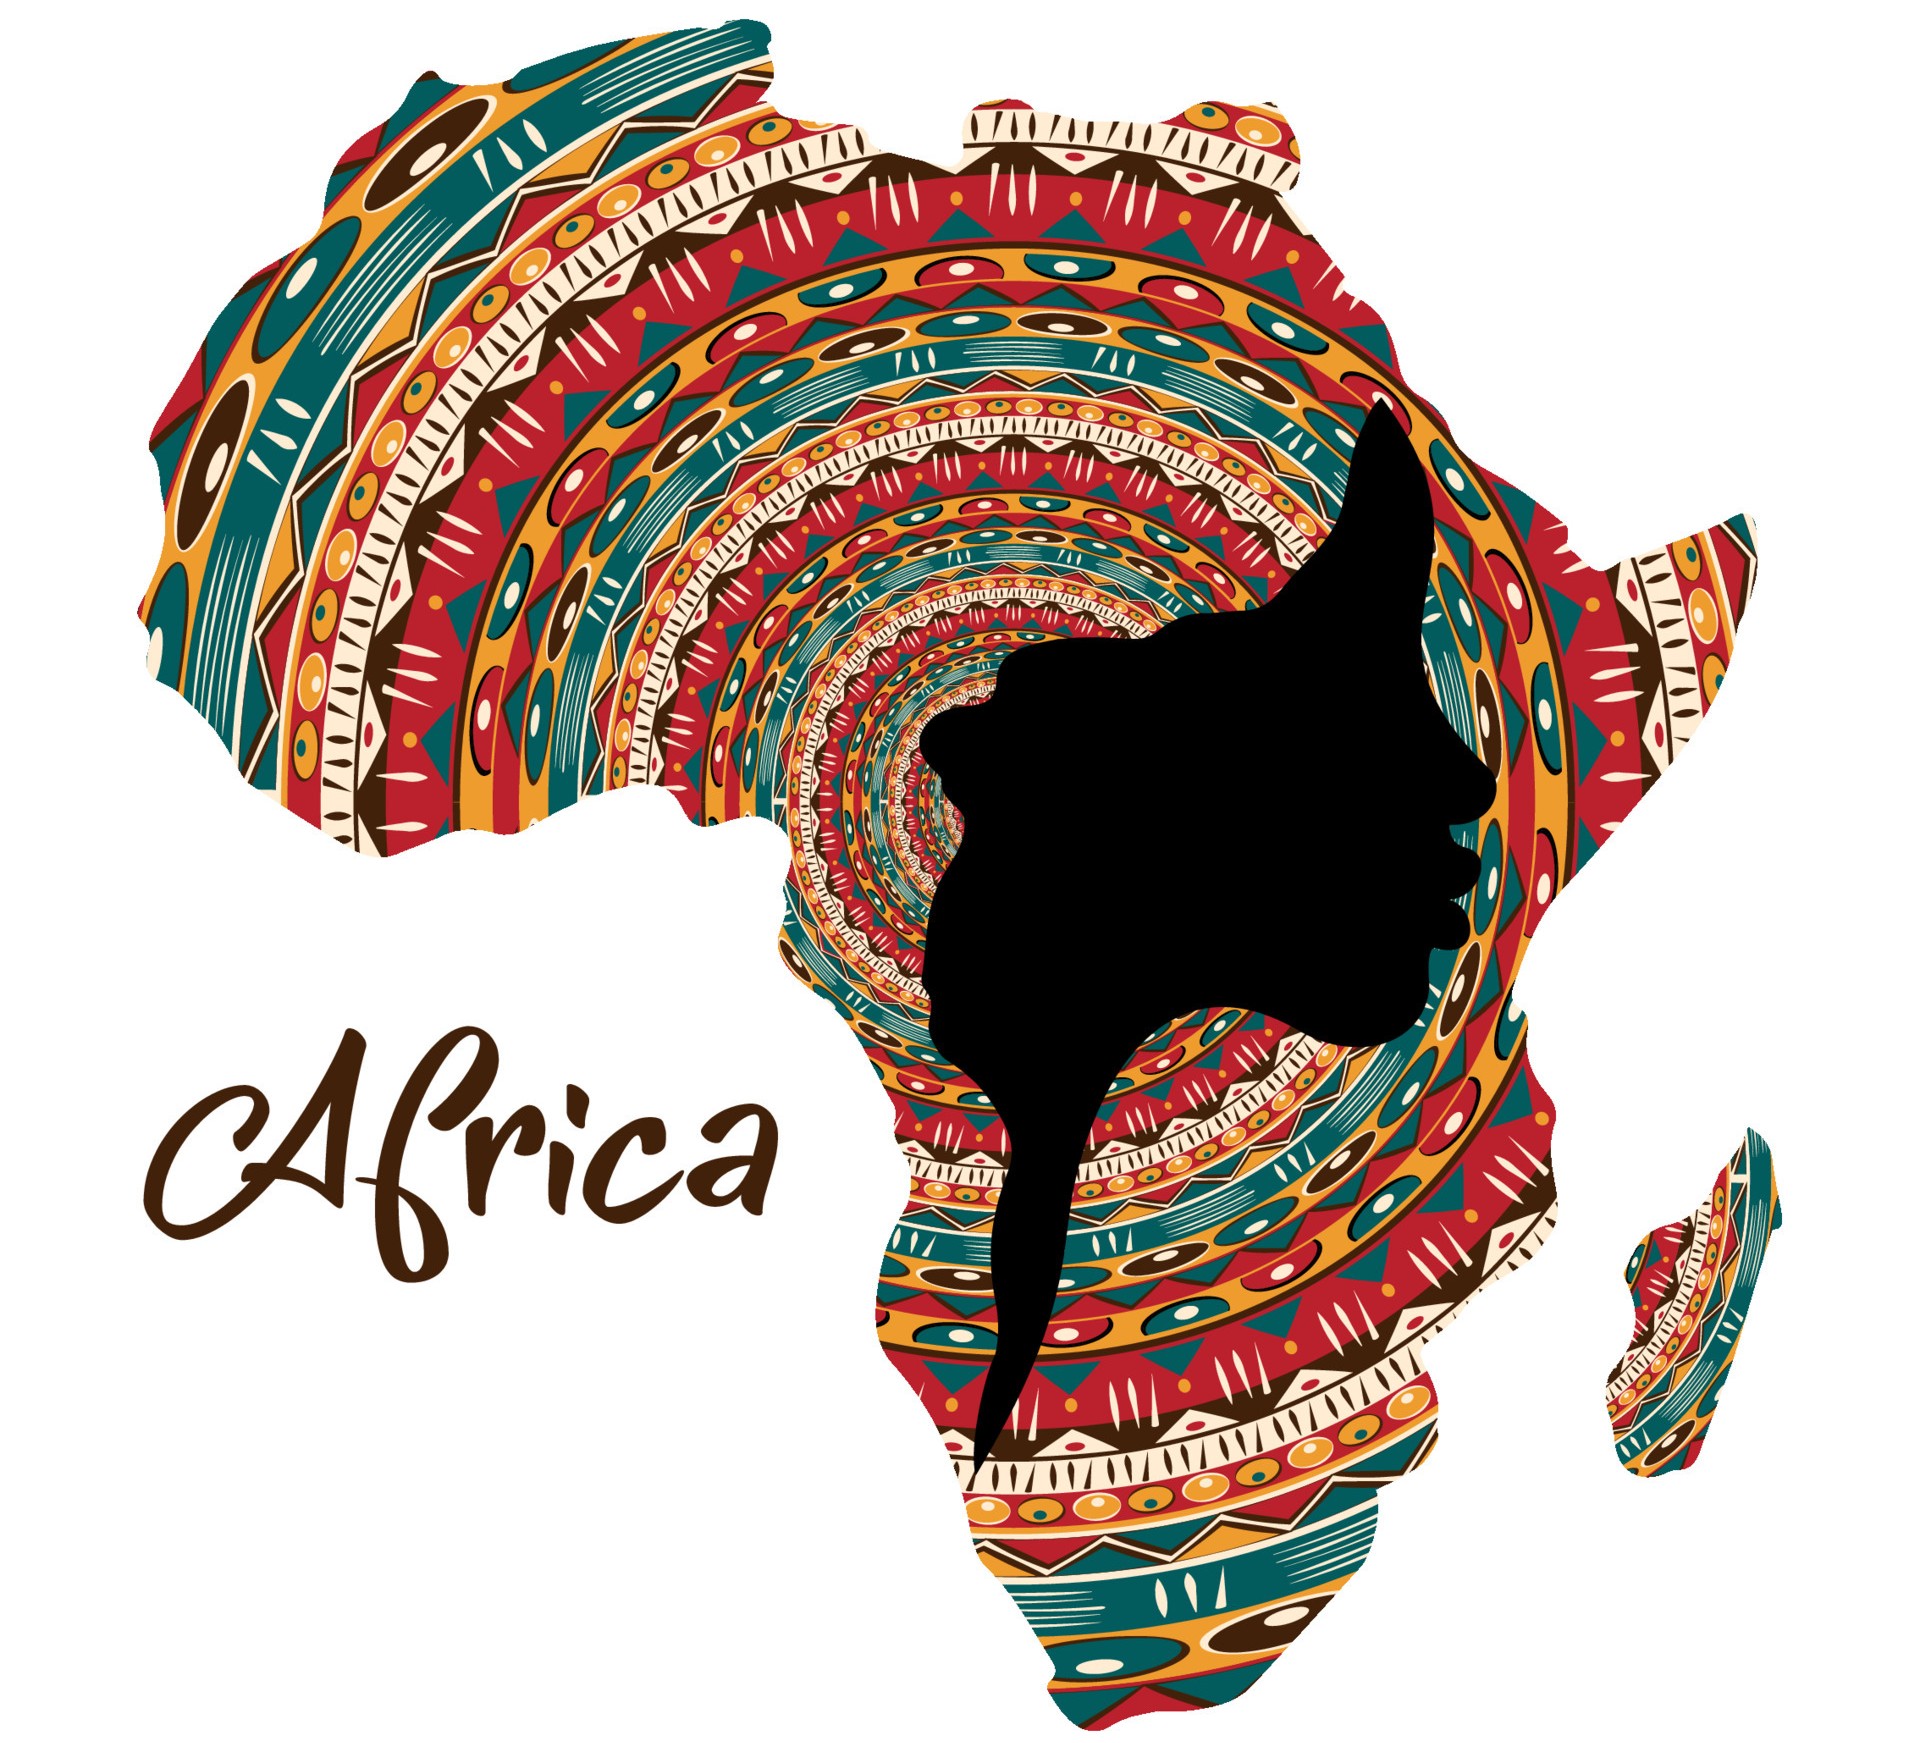 concept-of-african-woman-face-profile-silhouette-with-turban-in-the-shape-of-a-map-of-africa-colorful-afro-print-tribal-logo-design-template-illustration-isolated-on-white-background-vector~2.jpg